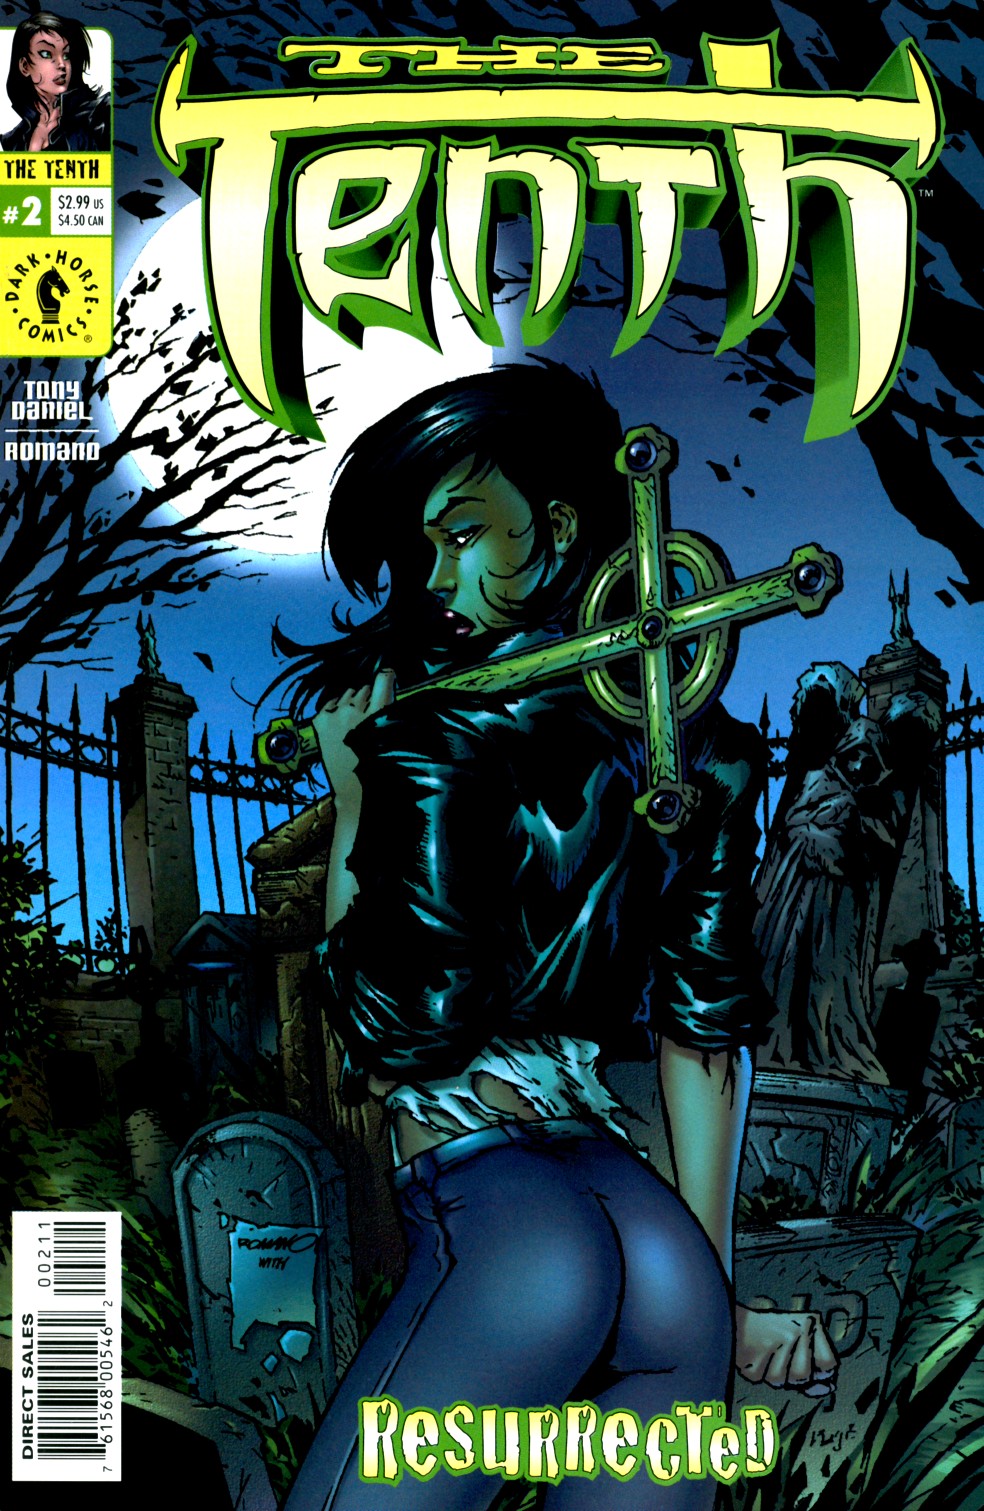 Read online The Tenth: Resurrected comic -  Issue #2 - 1